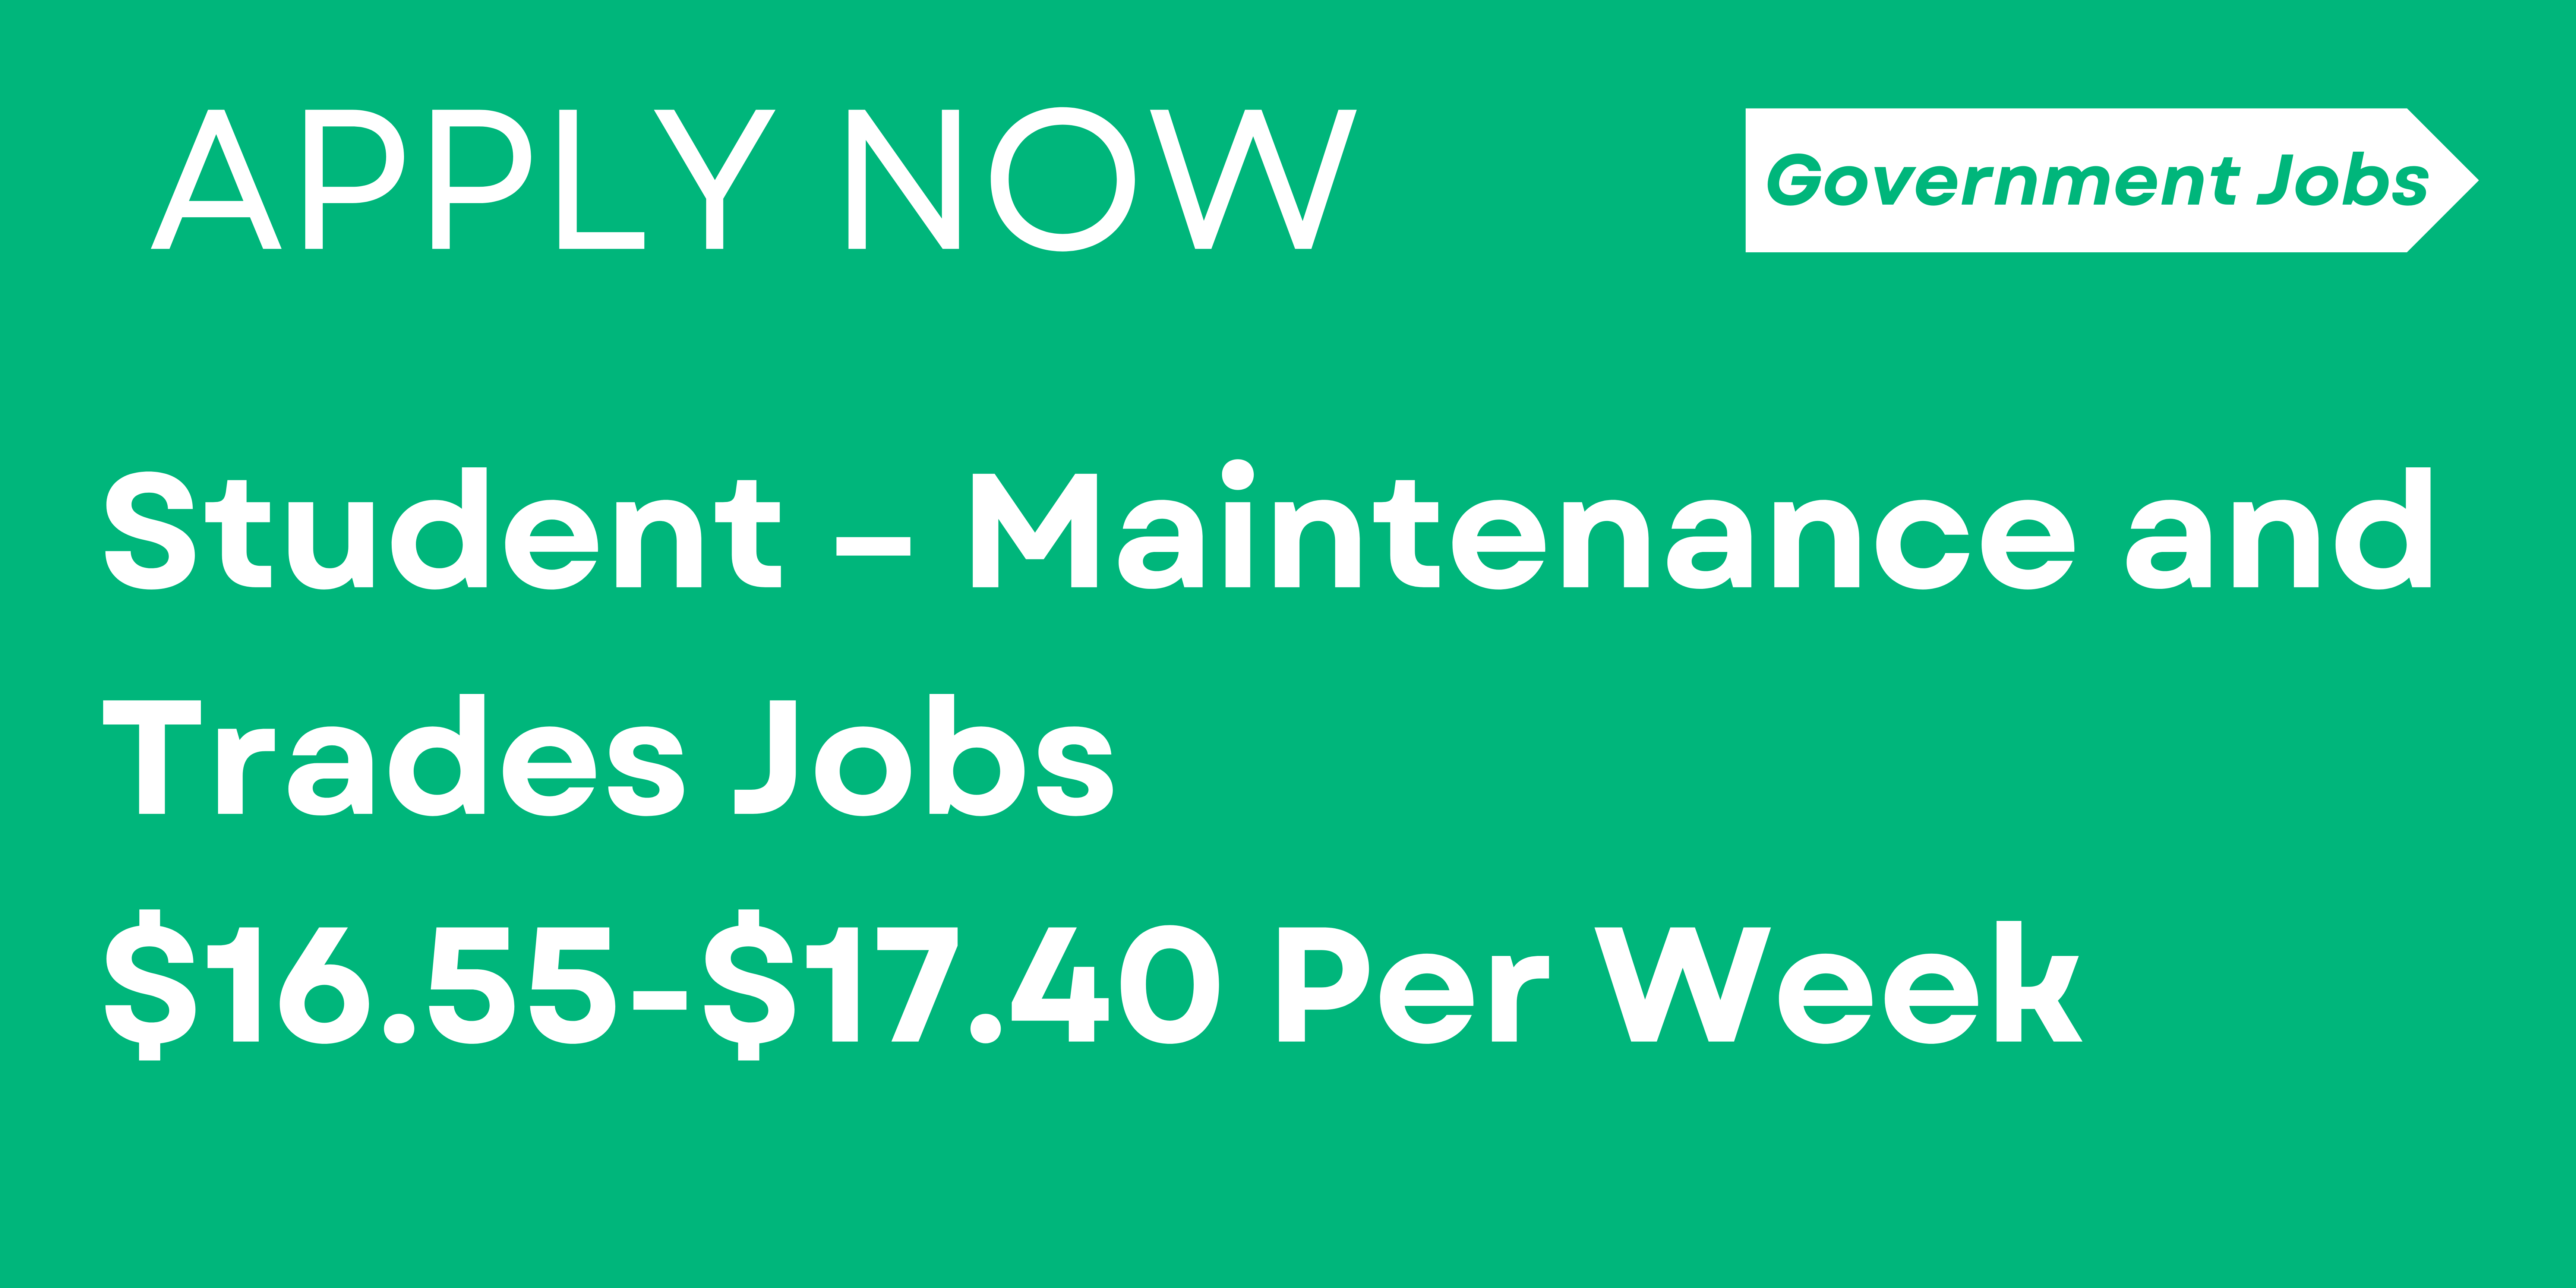 Student – Maintenance and Trades Jobs